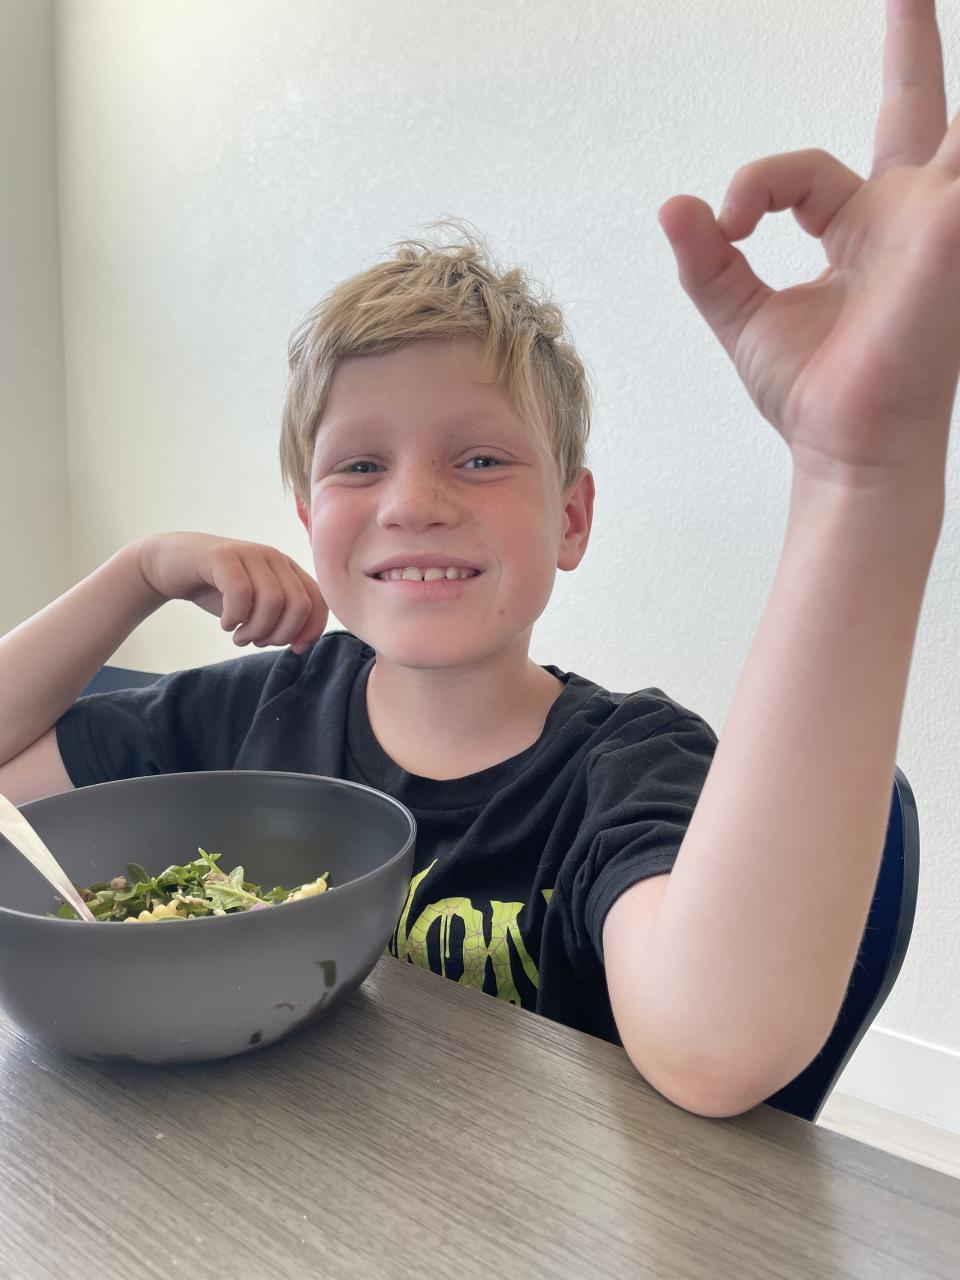 The author's son eating lunch and giving an A-OK gesture